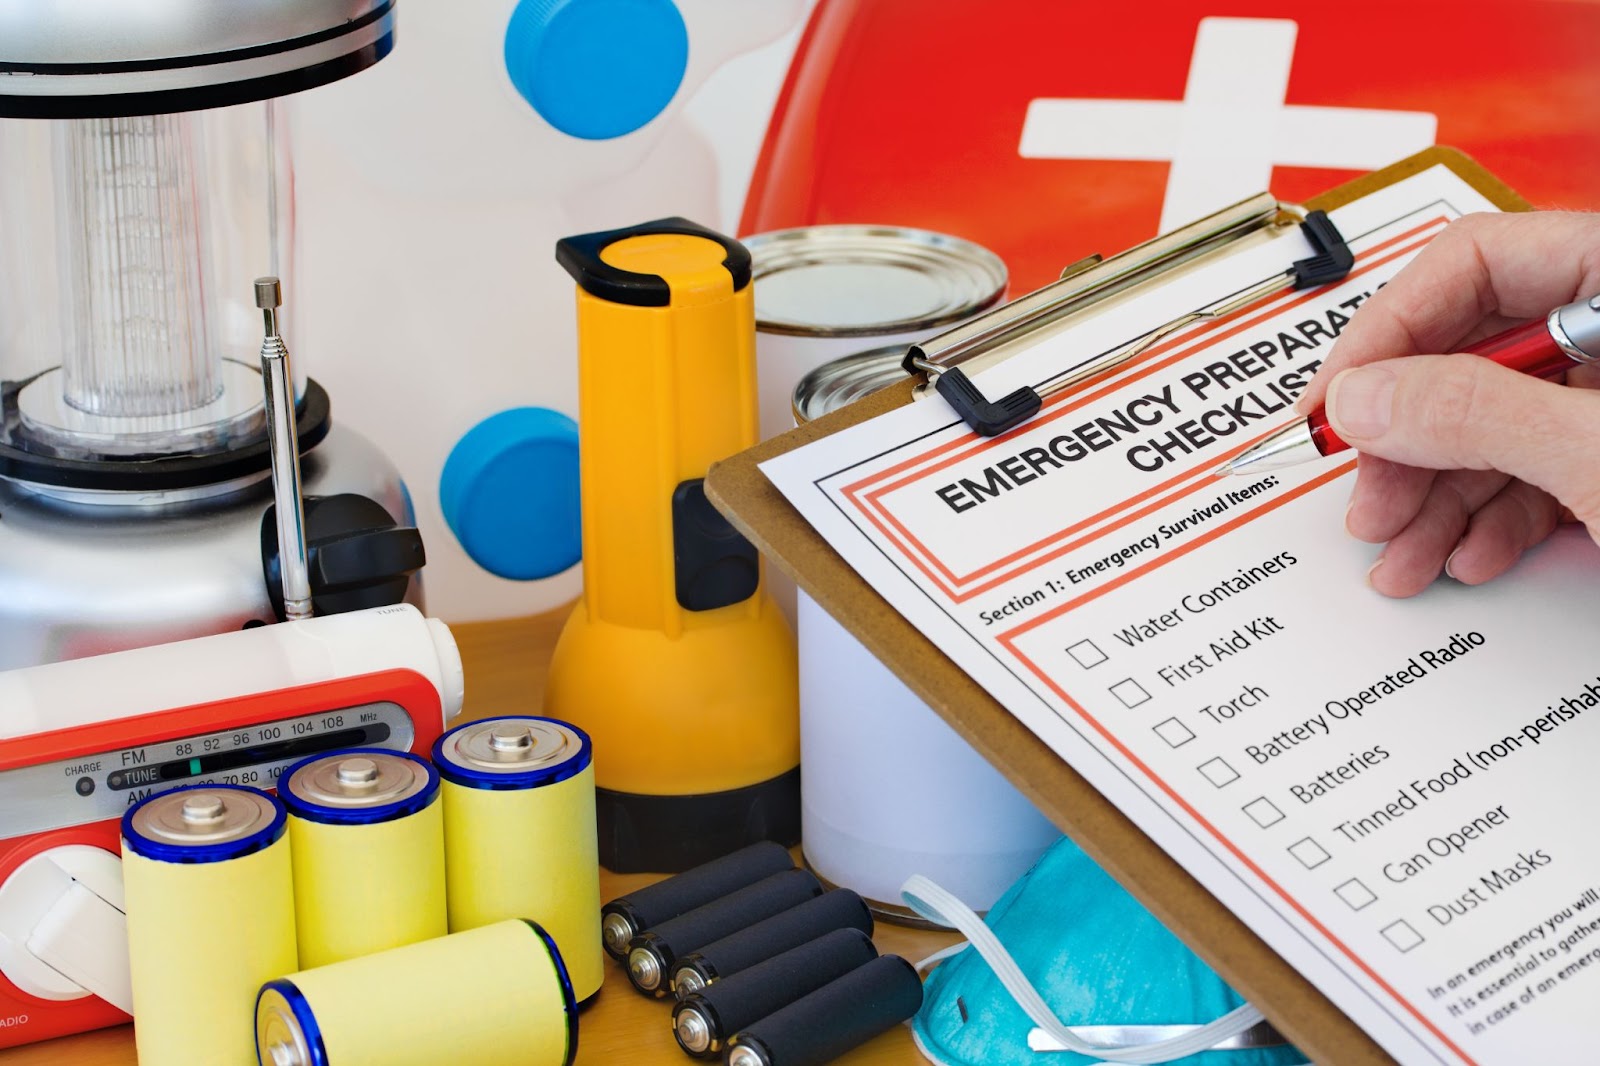 Emergency preparedness checklist: Be ready for storms. Plan ahead, gather supplies, and stay informed.